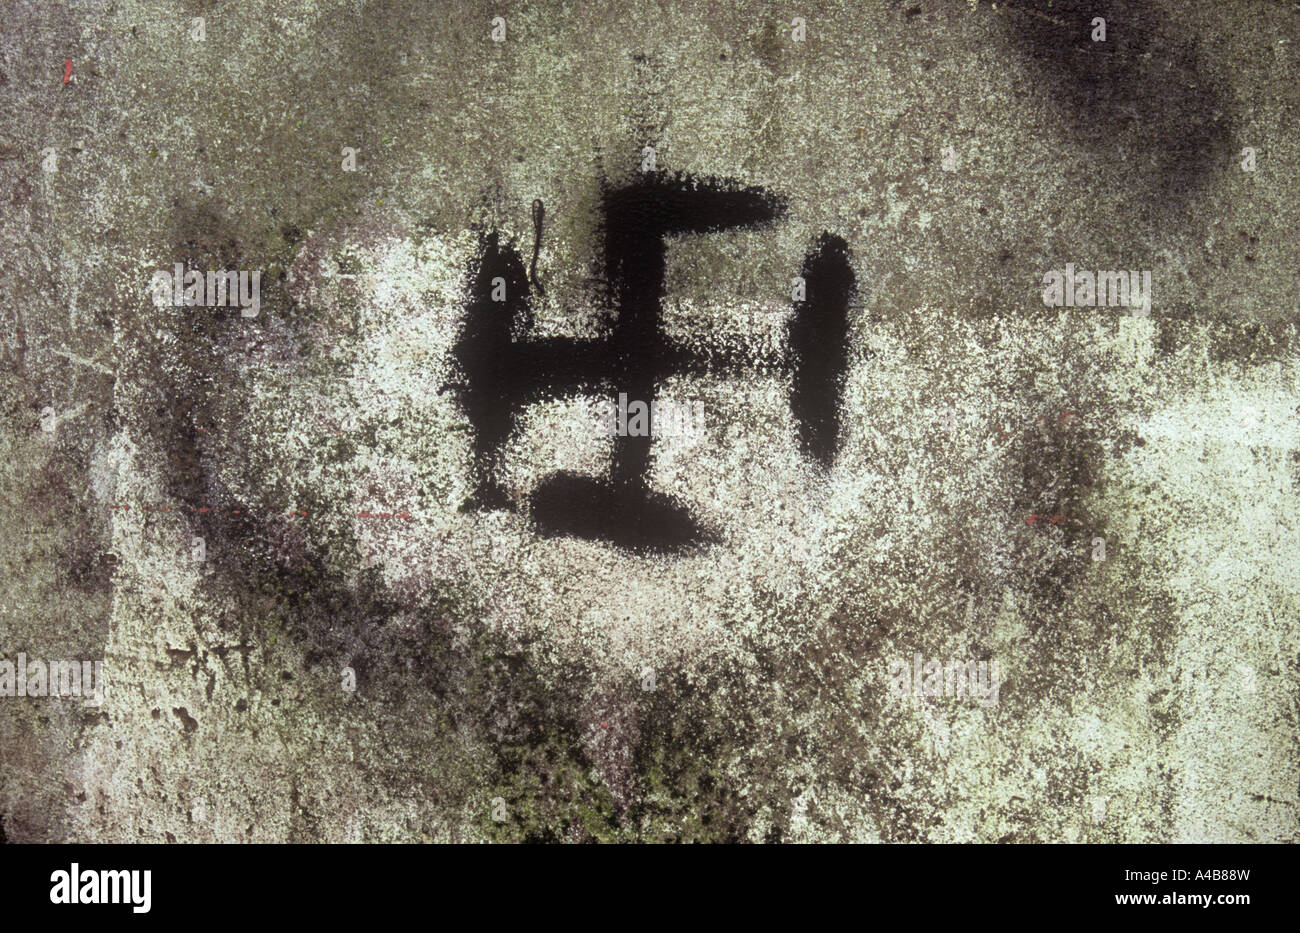 Close up of badly painted black swastika symbol on grubby stained cement or concrete Stock Photo